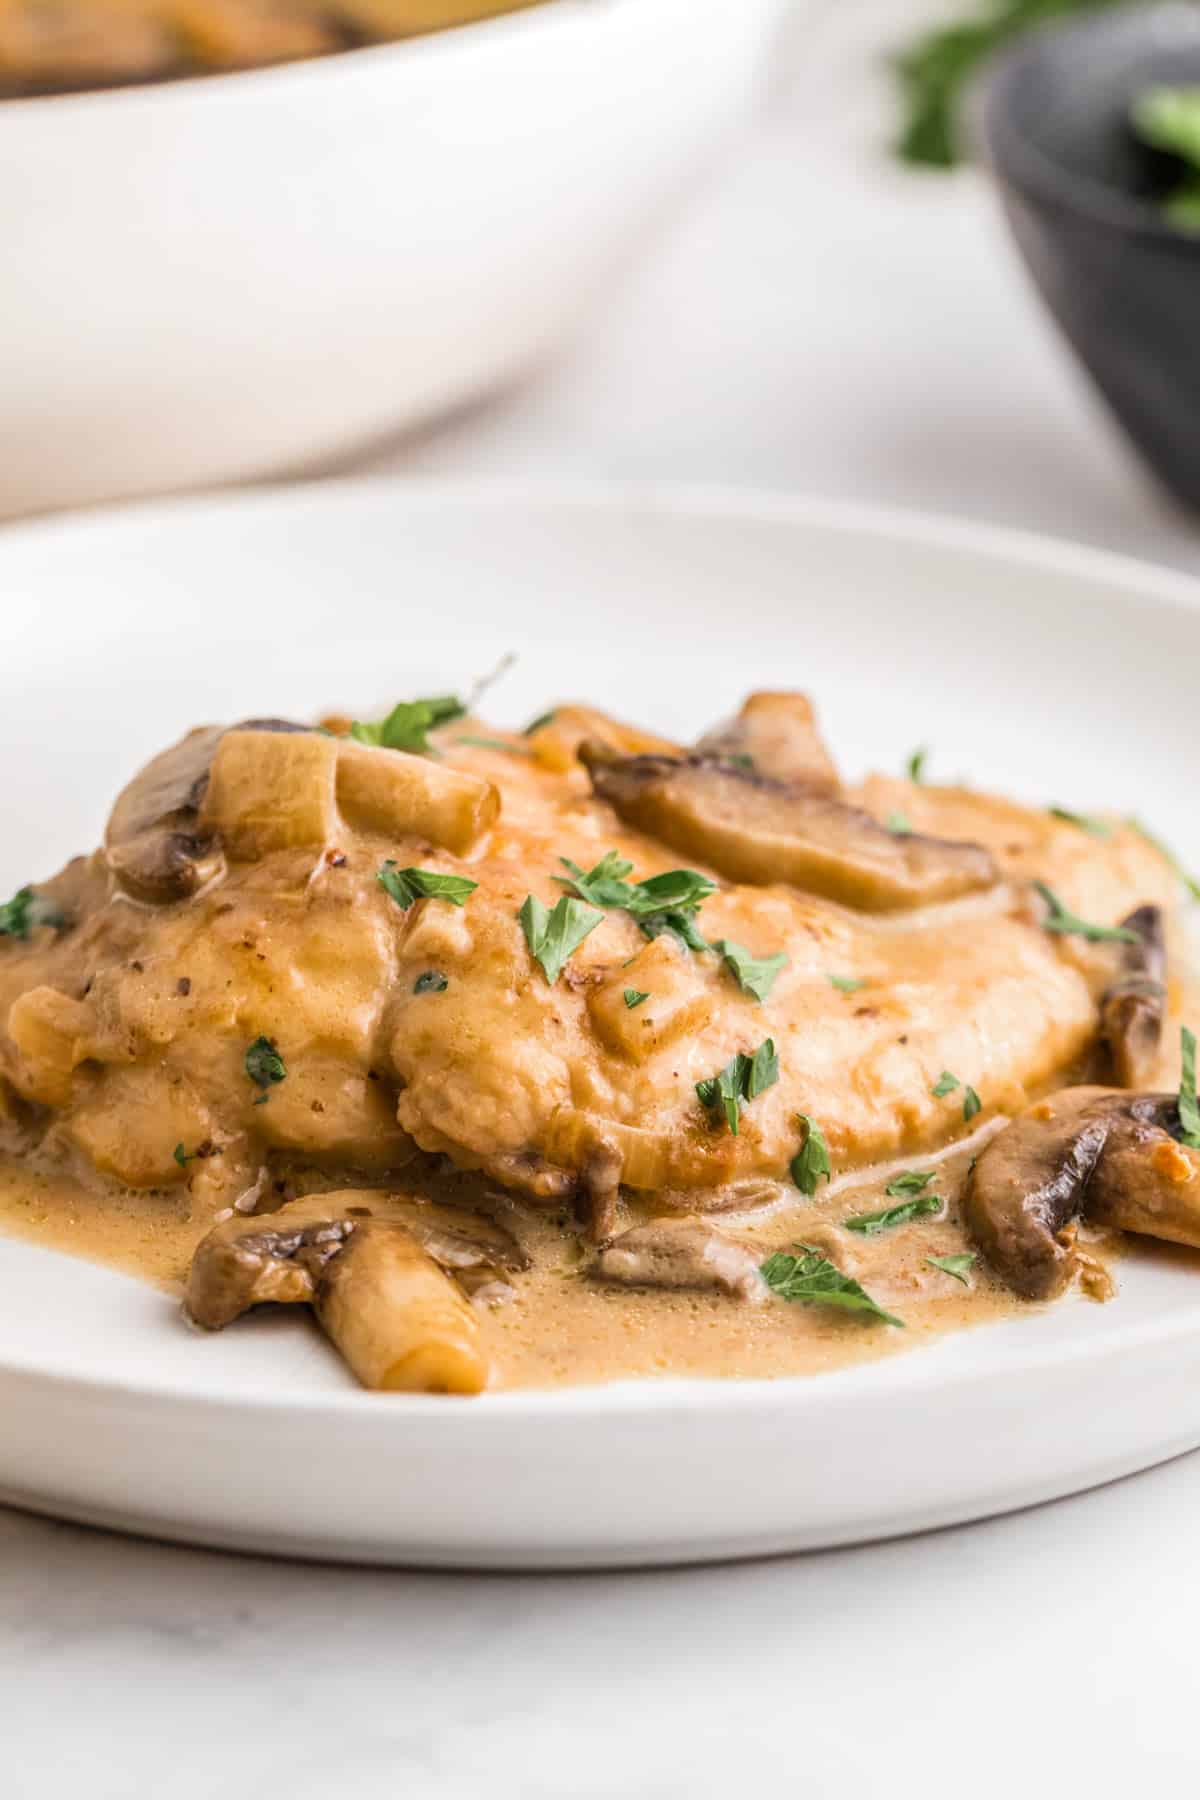 a piece of chicken breast coated in mushroom sauce on a plate.